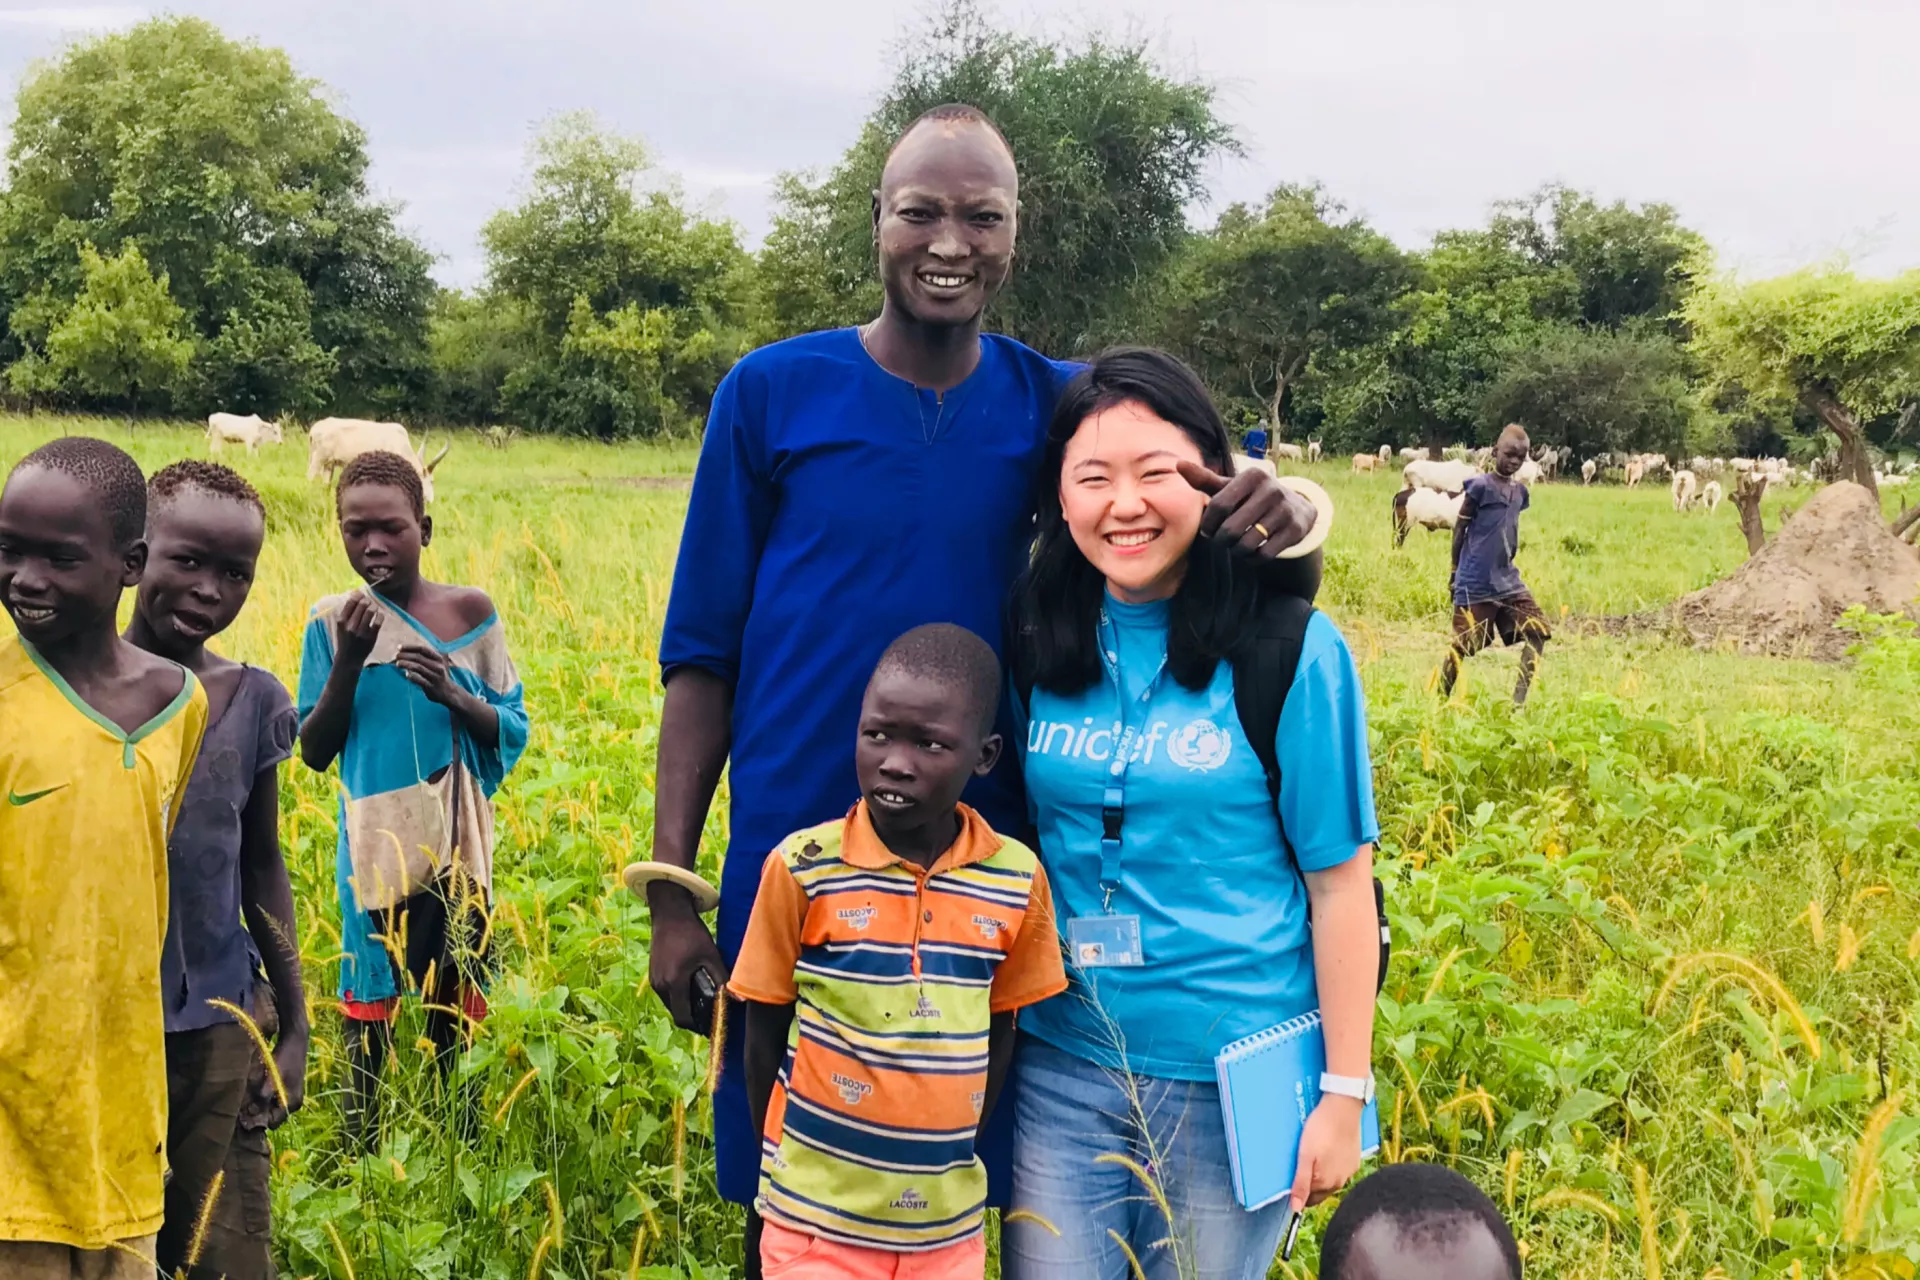 Yiming, an Education Officer on field mission, visits the Pulchuk Cattle Camp located in some remote area in the Lakes State of South Sudan.